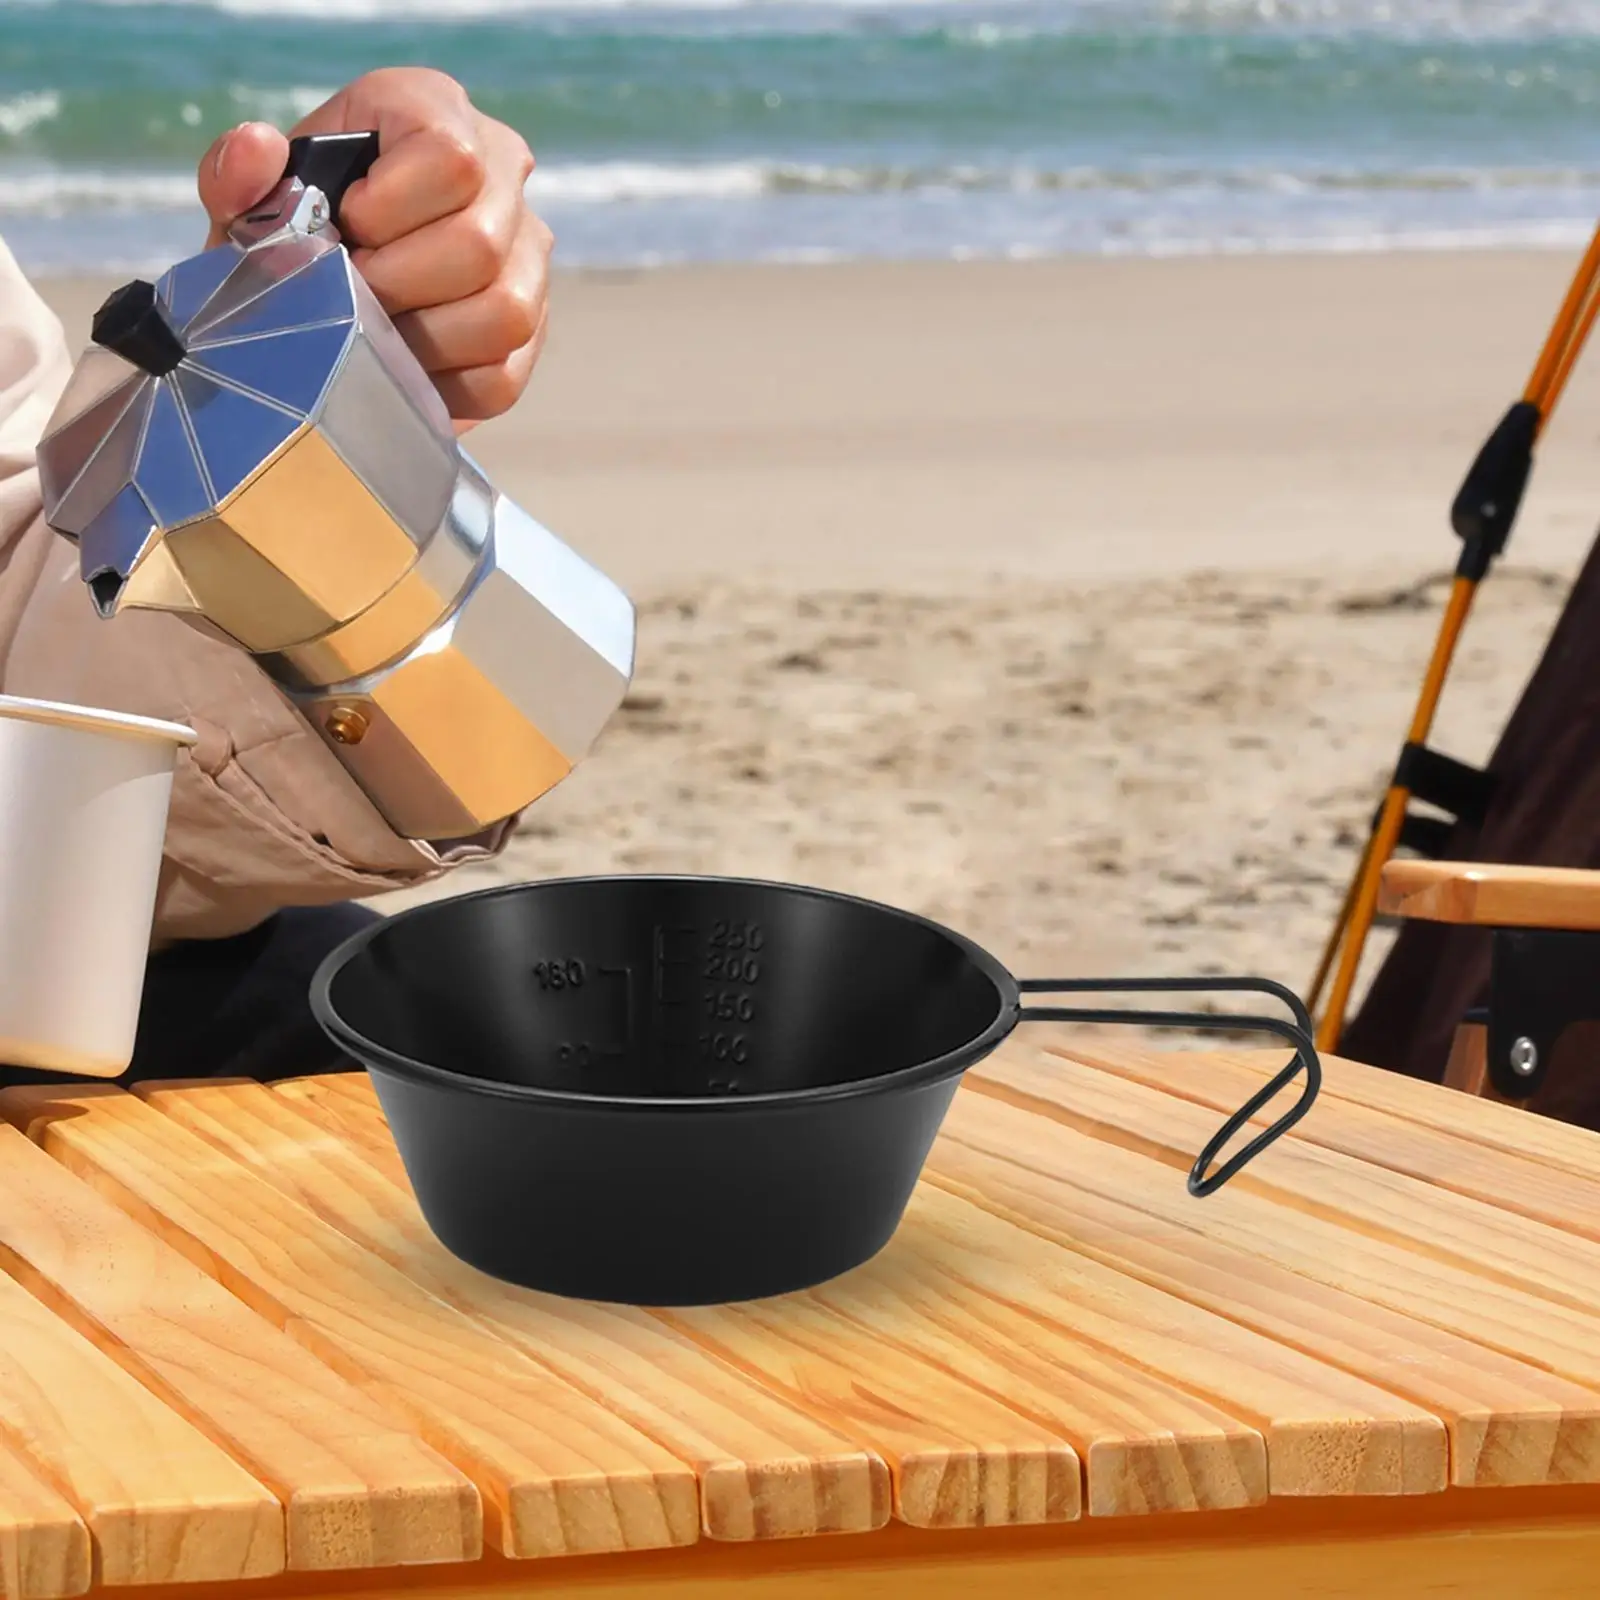 Stainless Steel Bowl Outdoor Cookware Beach Cooking Traveling Camping Cups